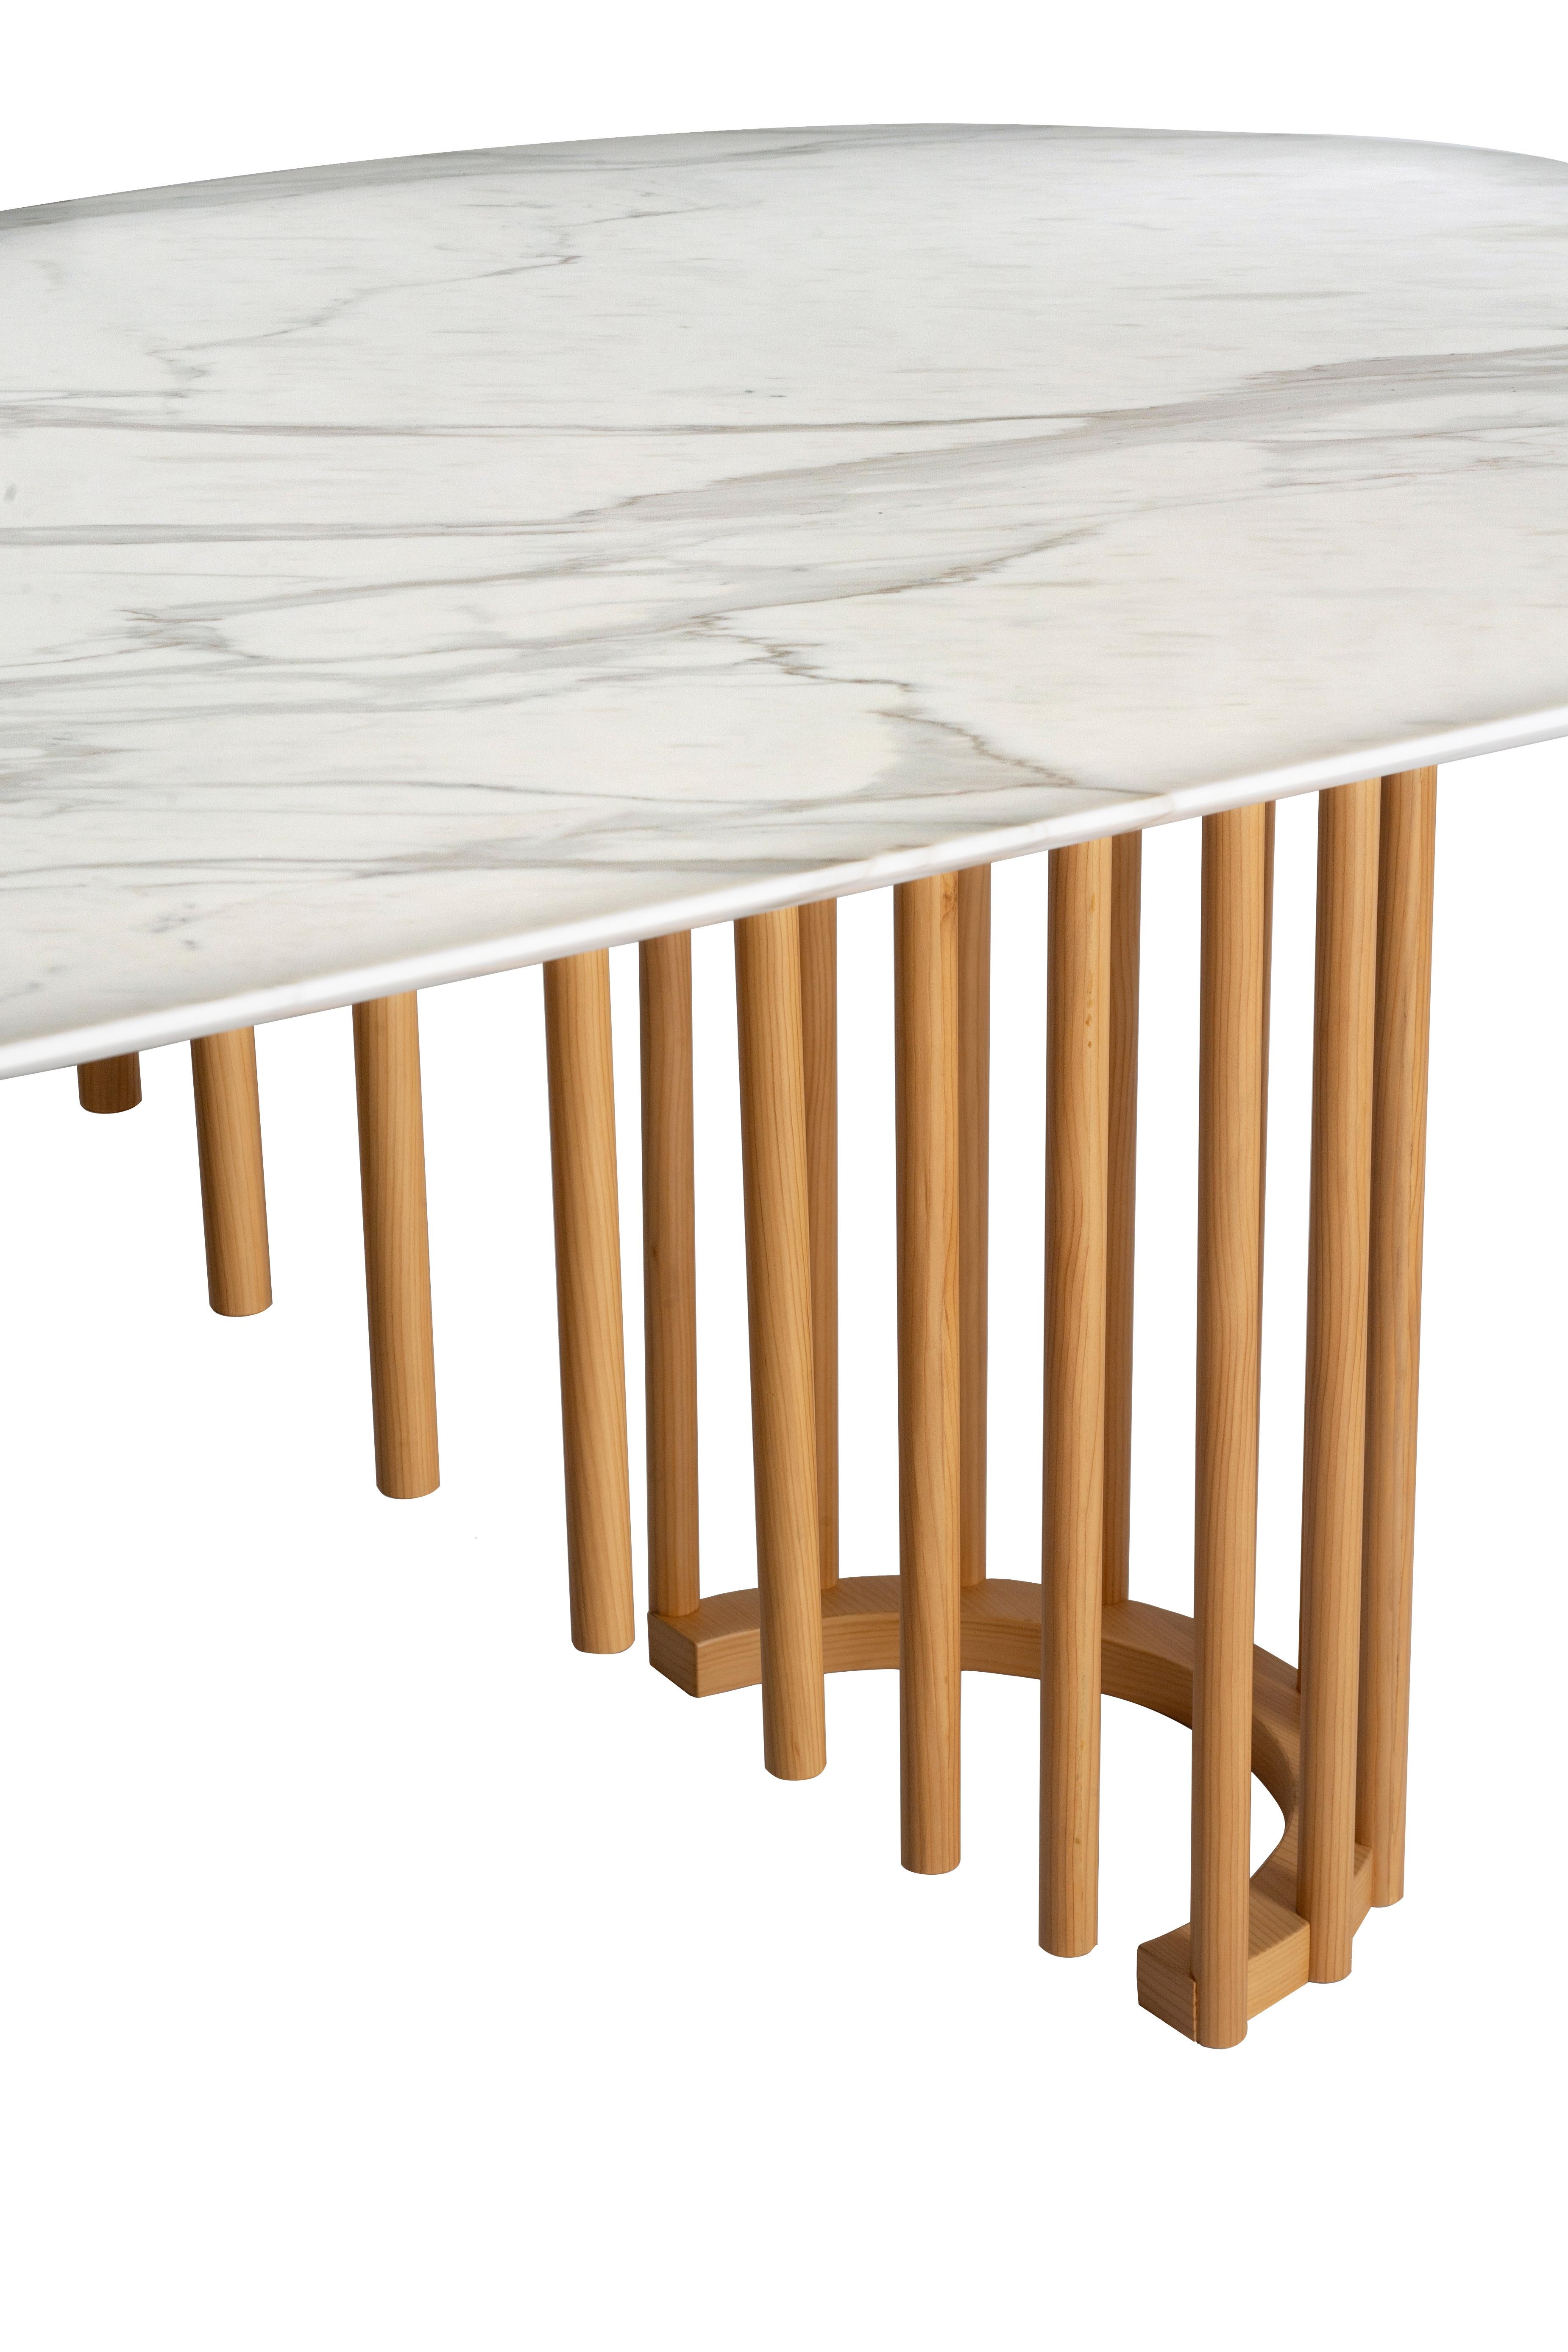 Italian 21st Century Giunchi Table in white Marble Calacatta and Cedar, Made in Italy For Sale